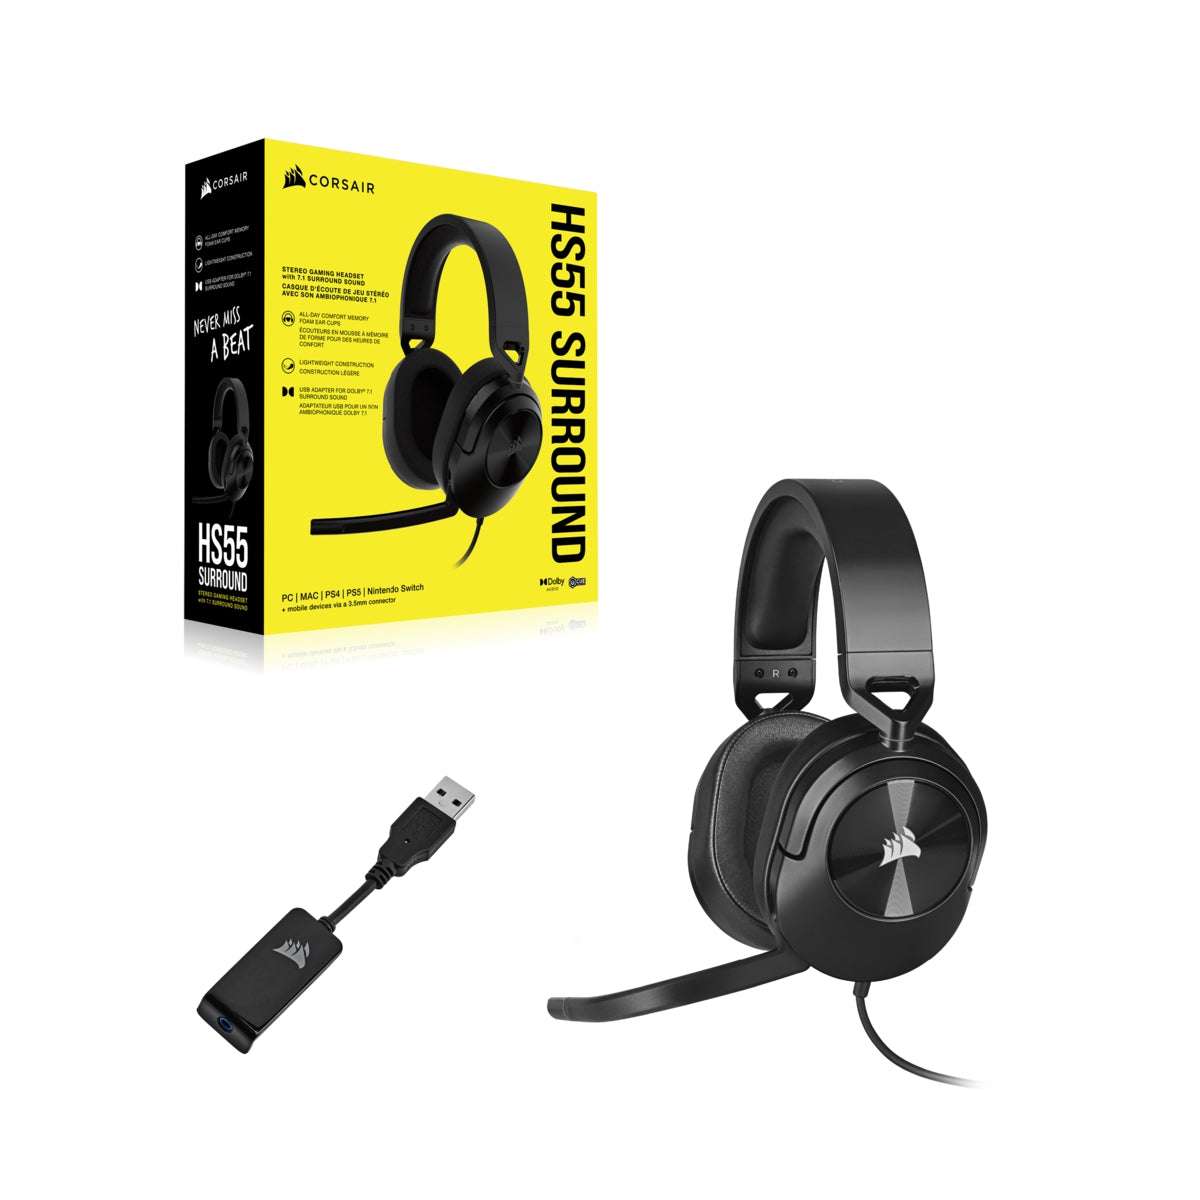 Headset Corsair Hs55 Surround Wired Carbon Ca-9011265-Na